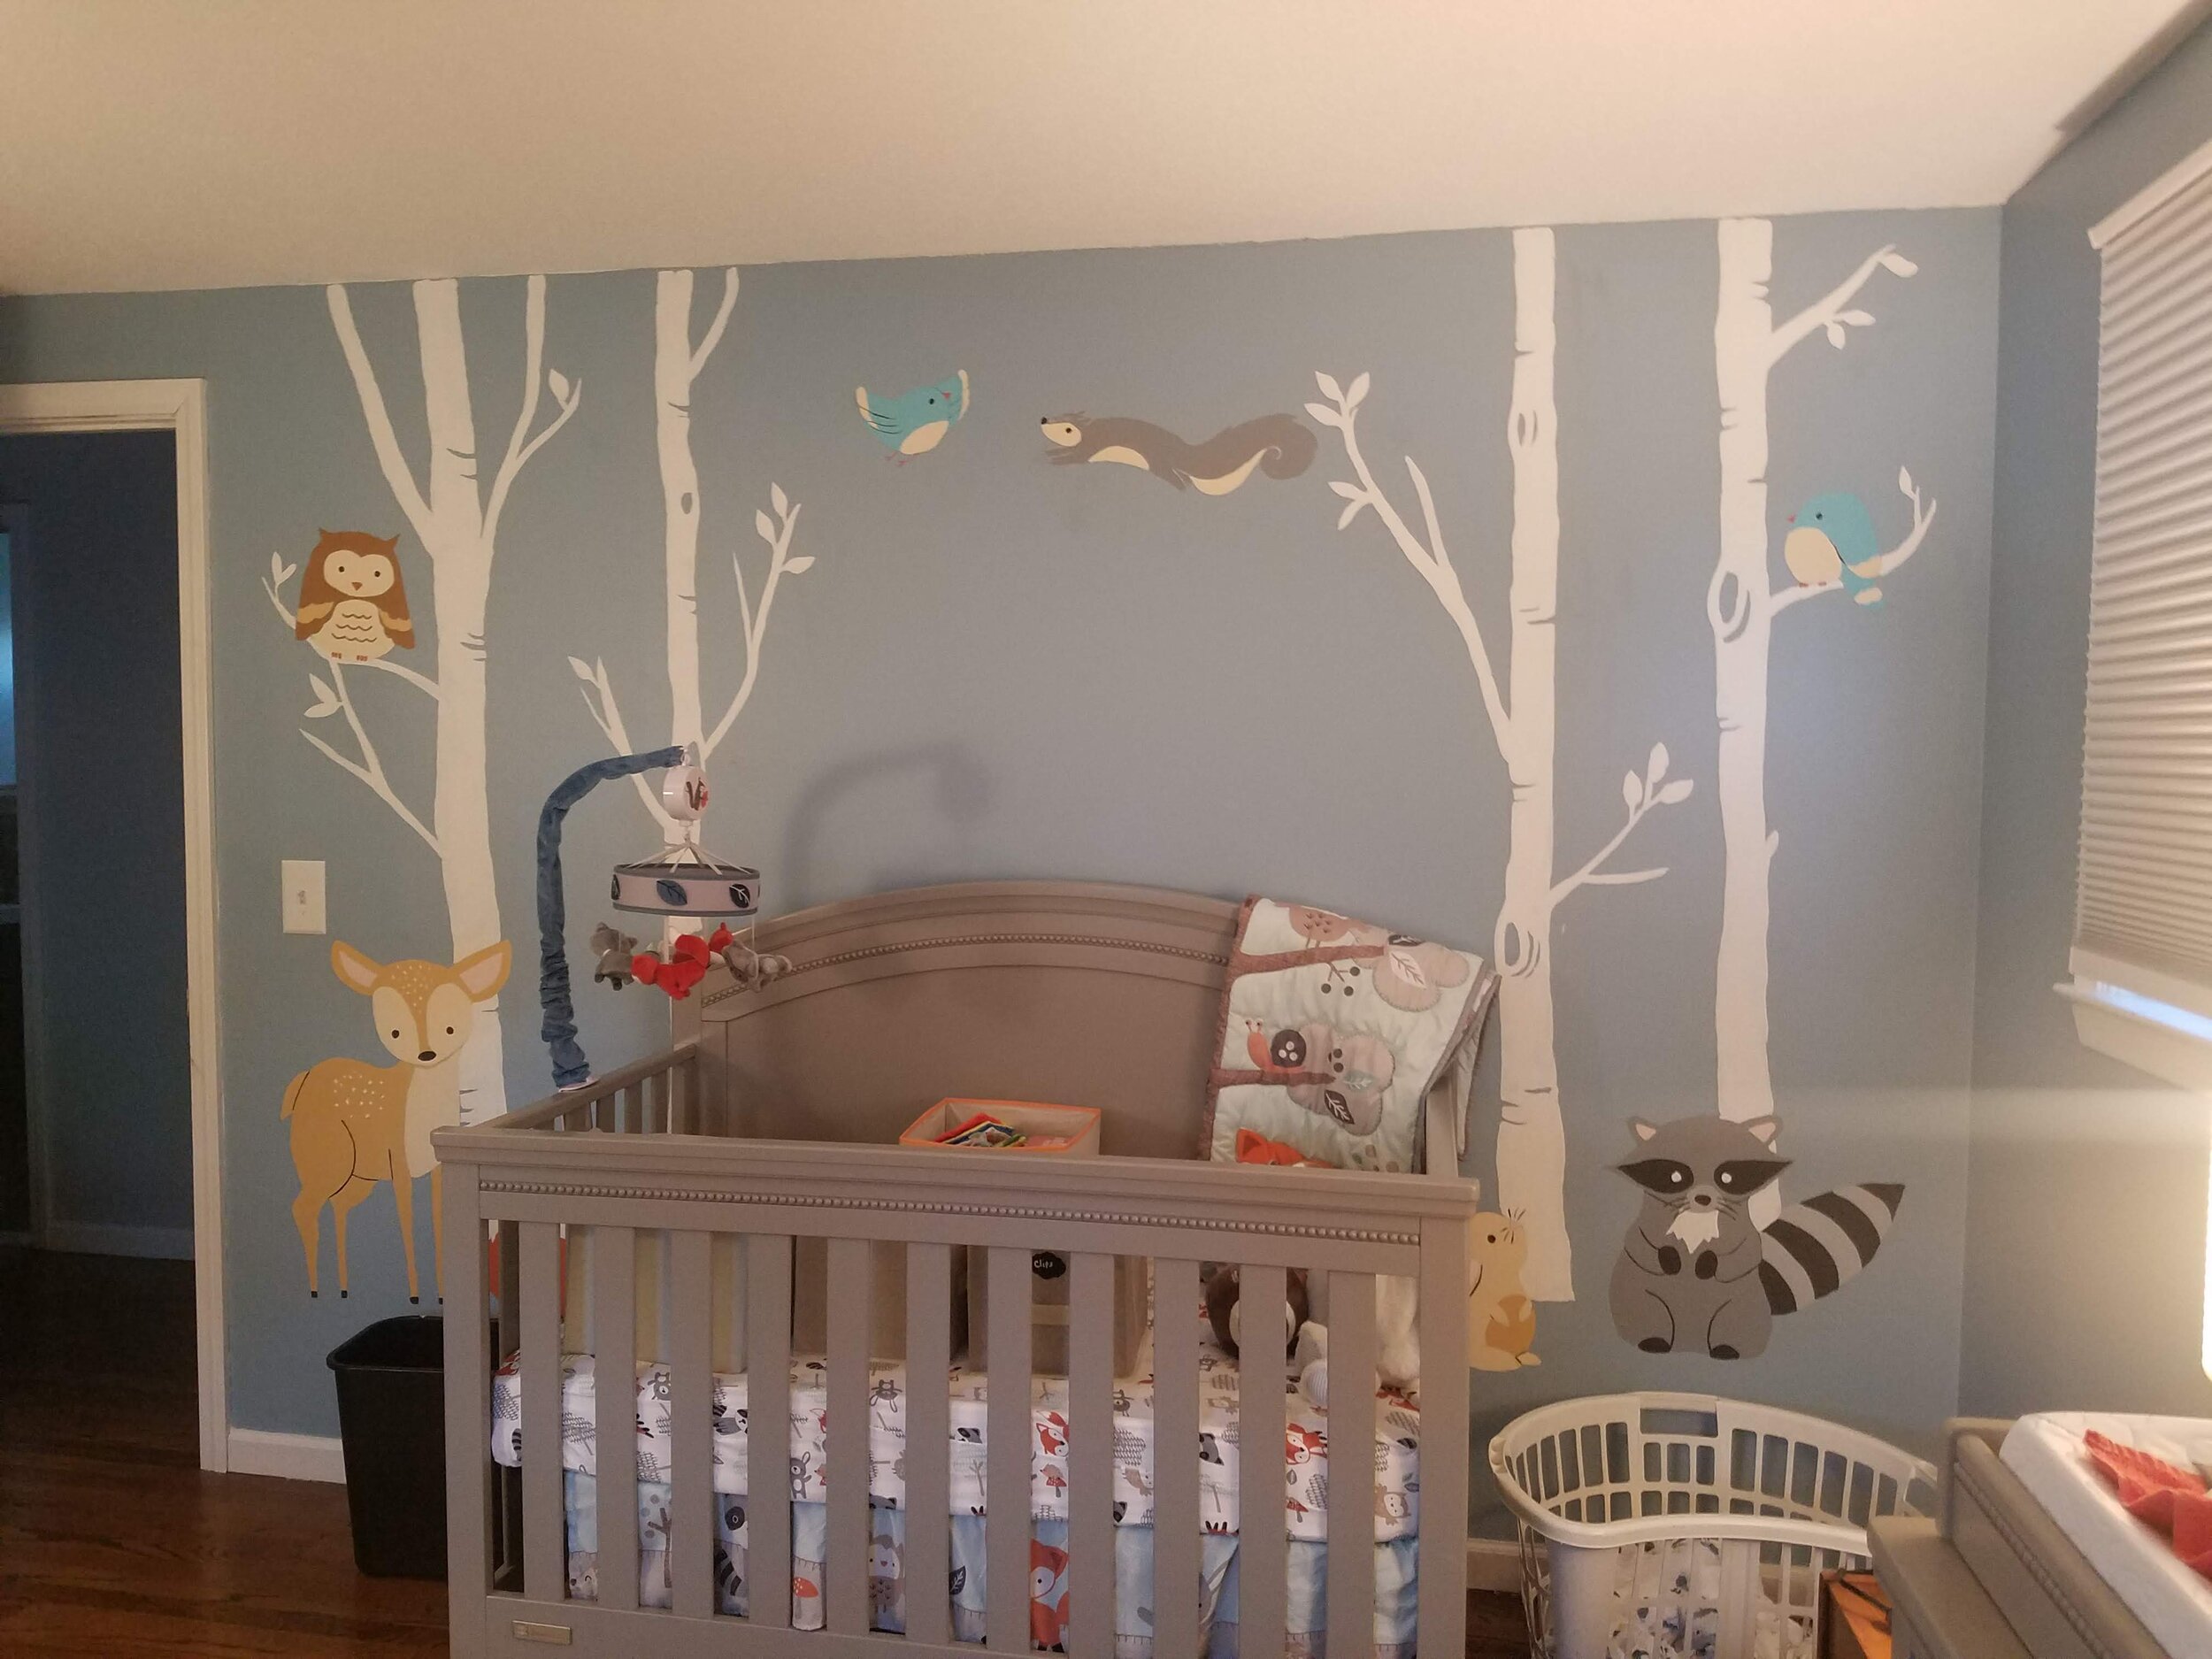 Finished mural with crib